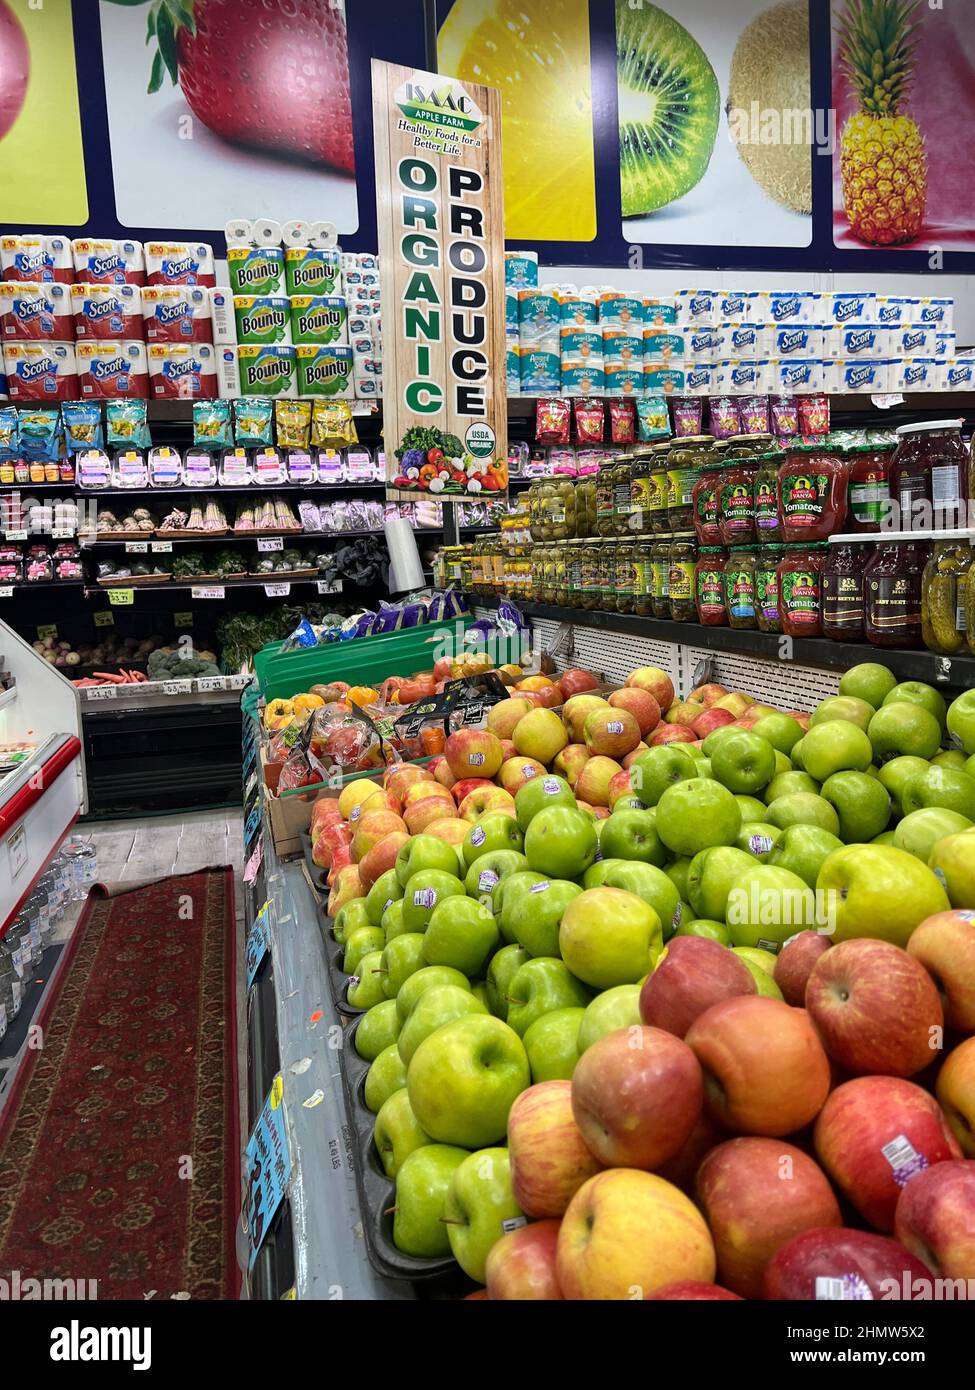 More and more grocery stores and markets are carrying organic foods as moore and more shoppers have health concerns about the quaslity of food production. Stock Photo